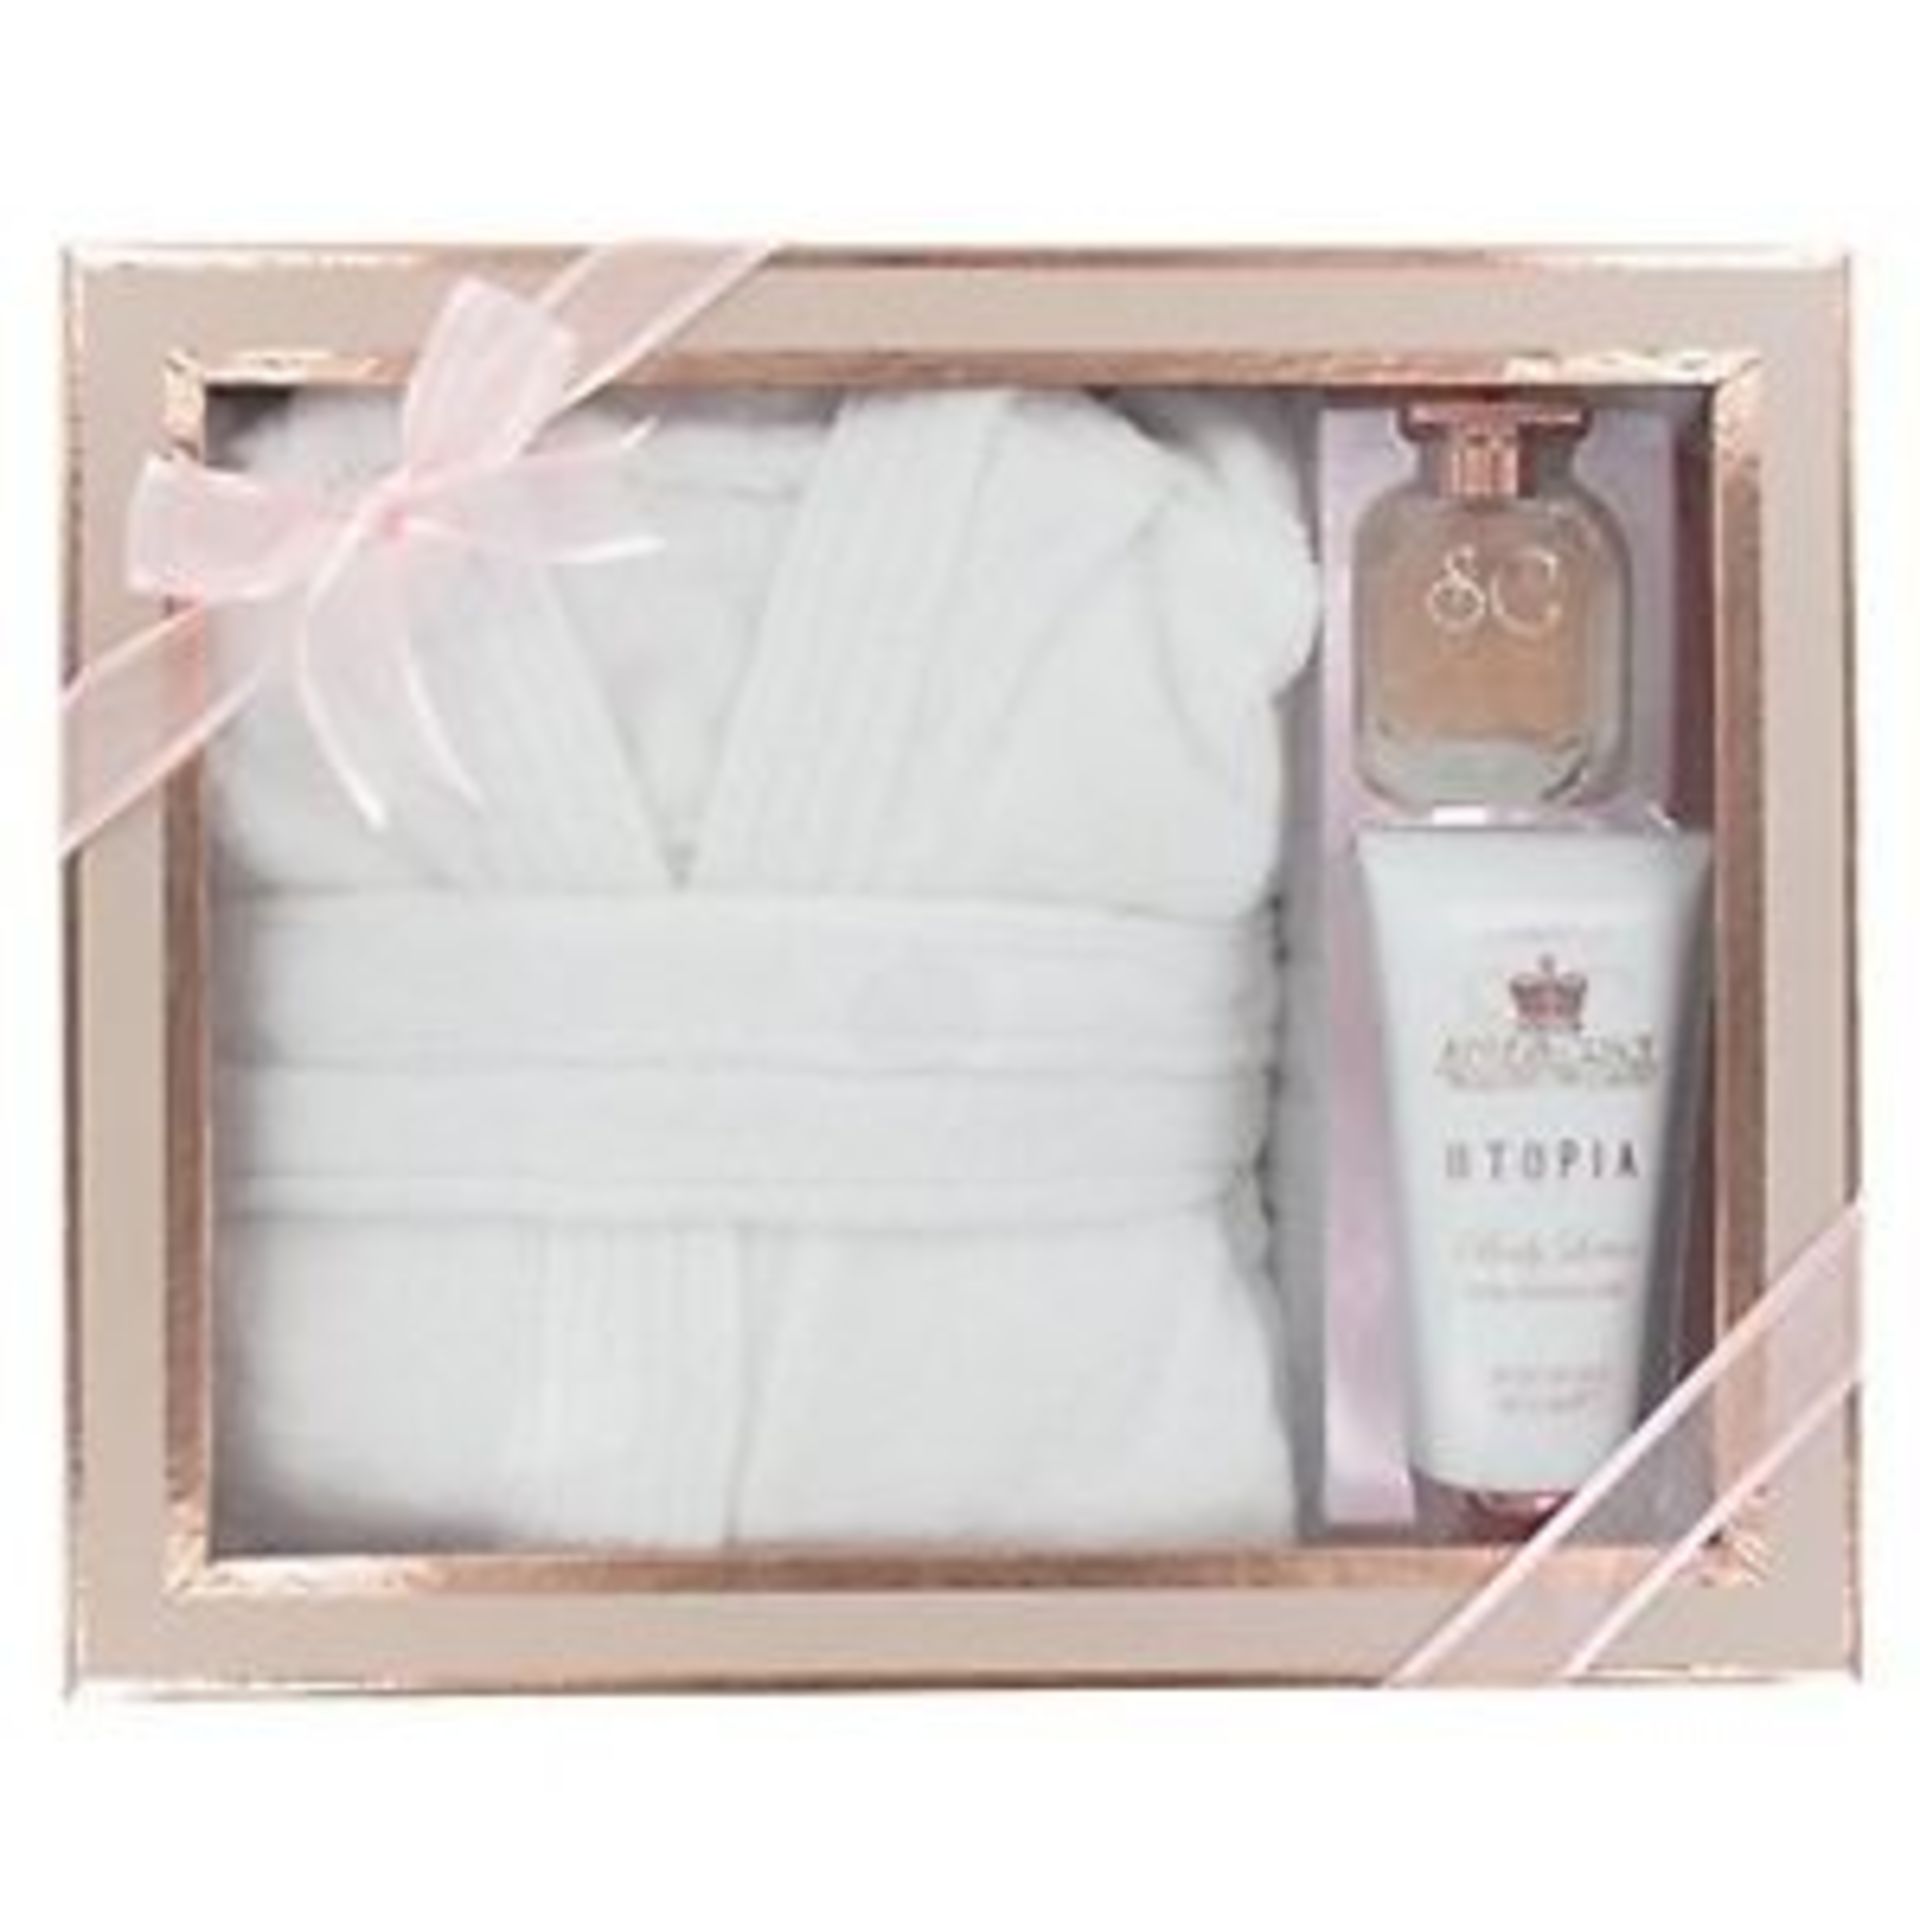 V *TRADE QTY* Brand New Style and Grace Utopia Extravagant Robe Gift Set X 3 YOUR BID PRICE TO BE